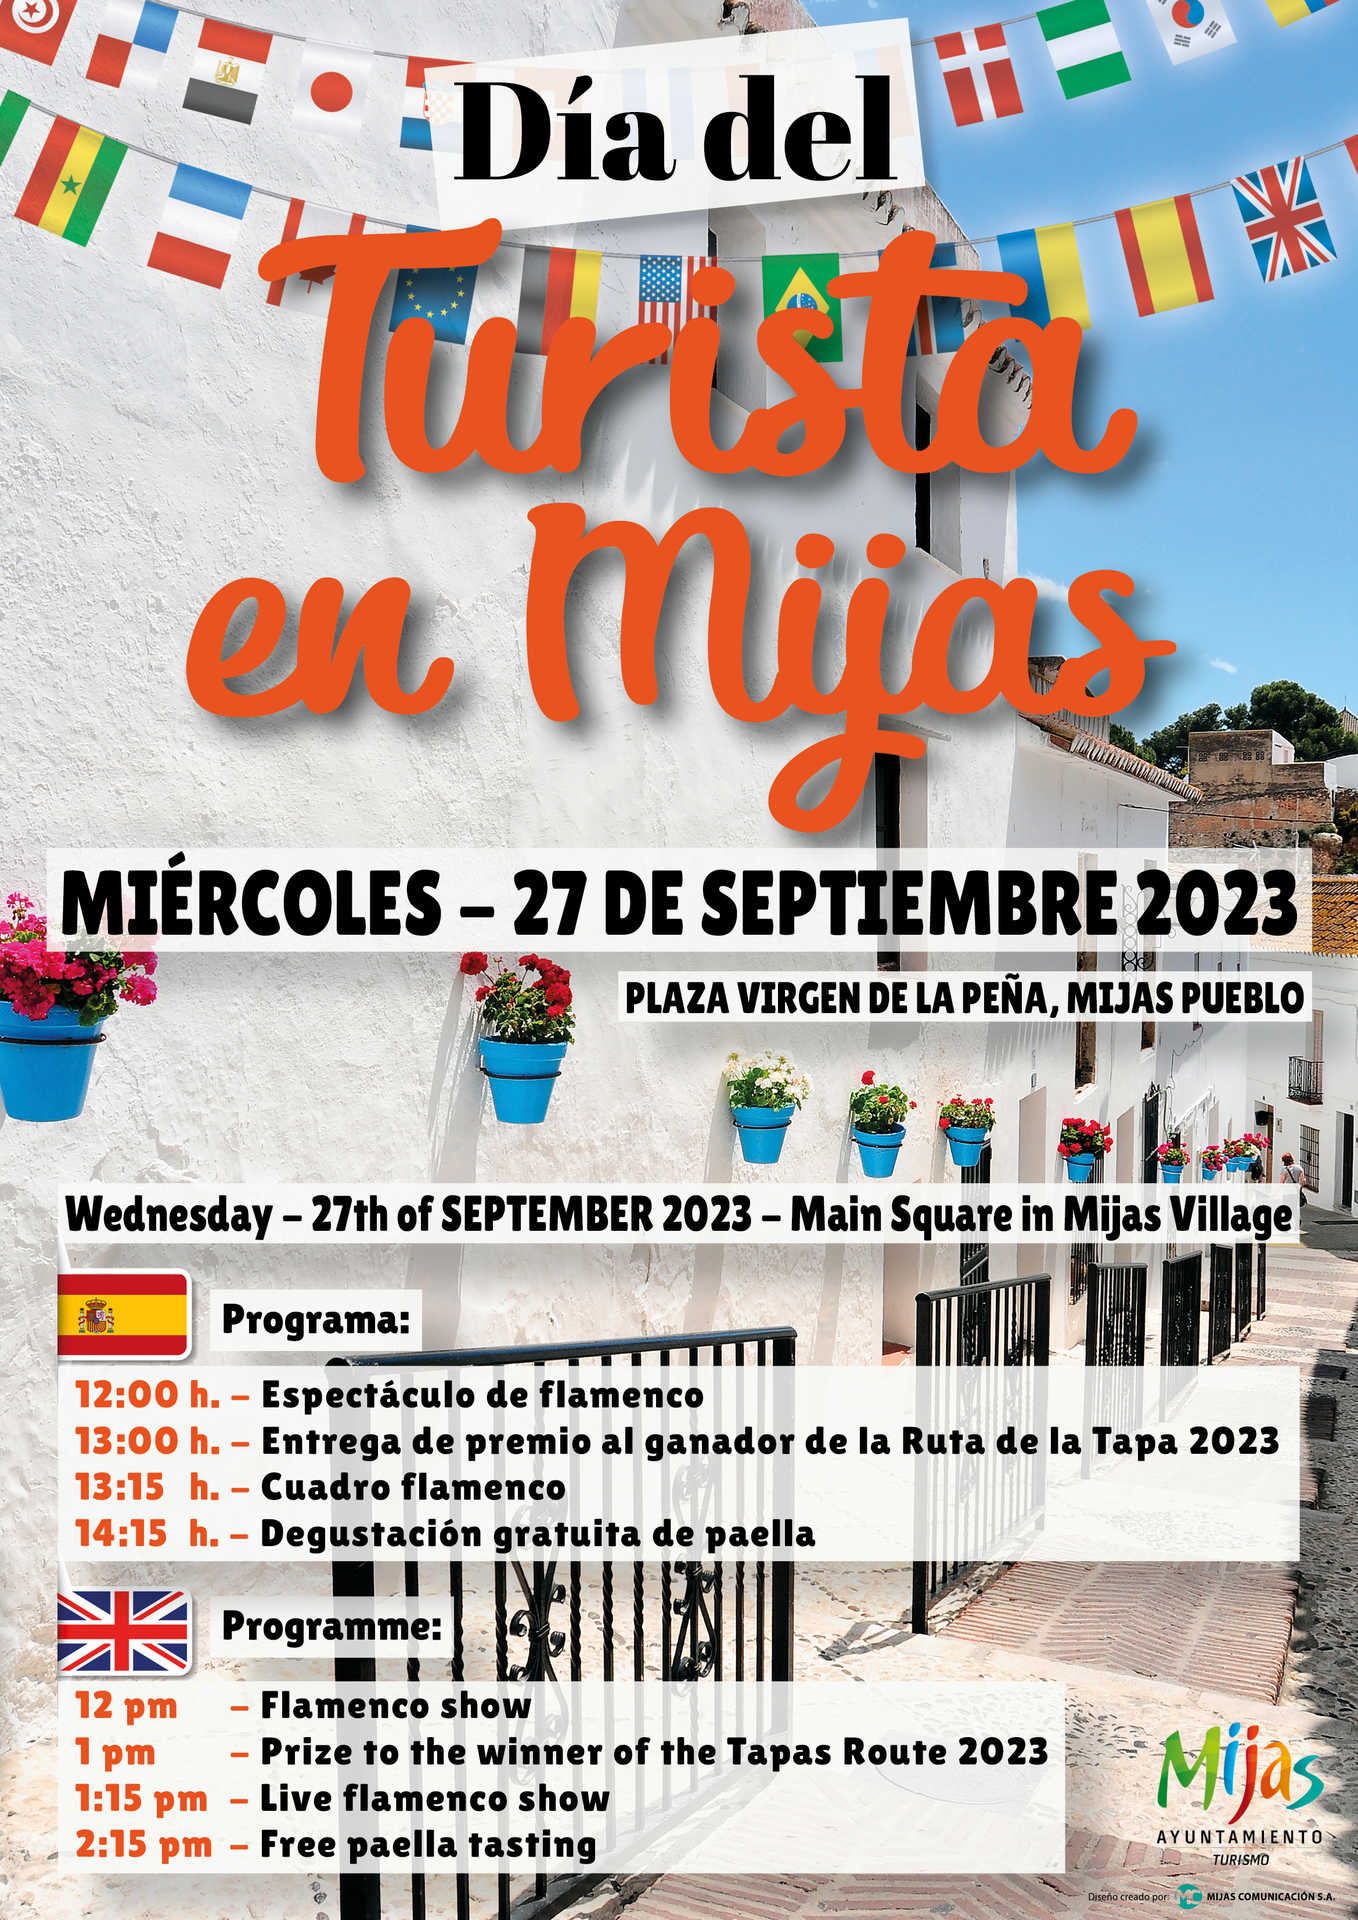 Day of the tourist in Mijas